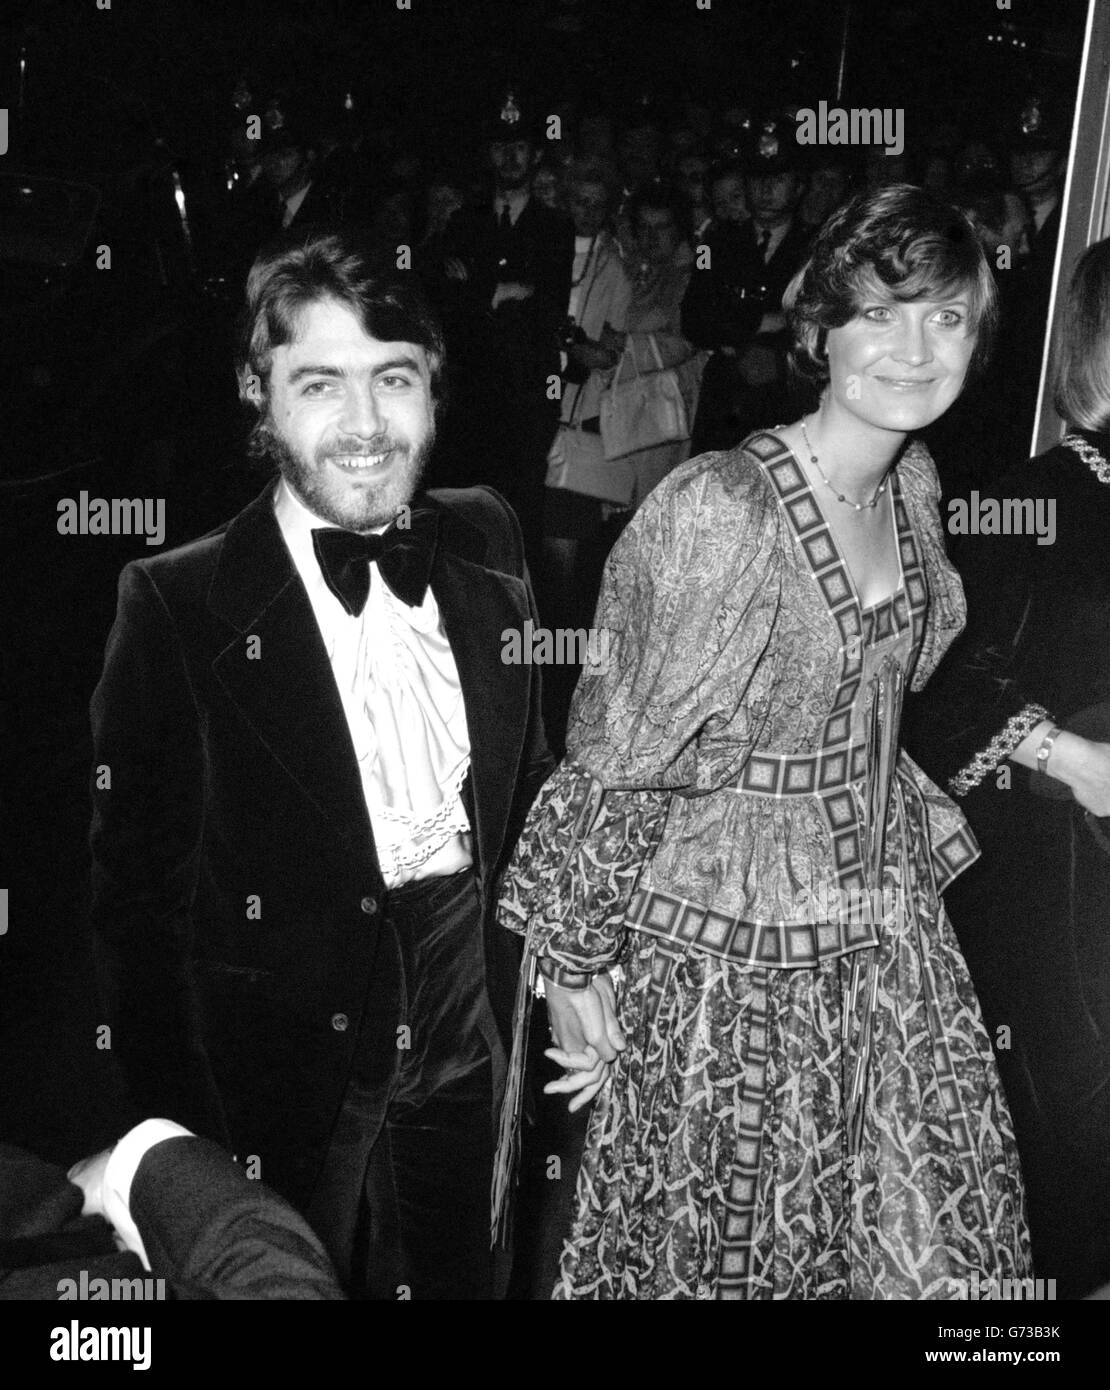 Fashion designer Jeff Banks with his wife singer Sandie Shaw, arriving at the London Palladium where they were attending the Royal Gala Variety Performance in aid of the 1972 British Olympic Appeal Fund. Stock Photo